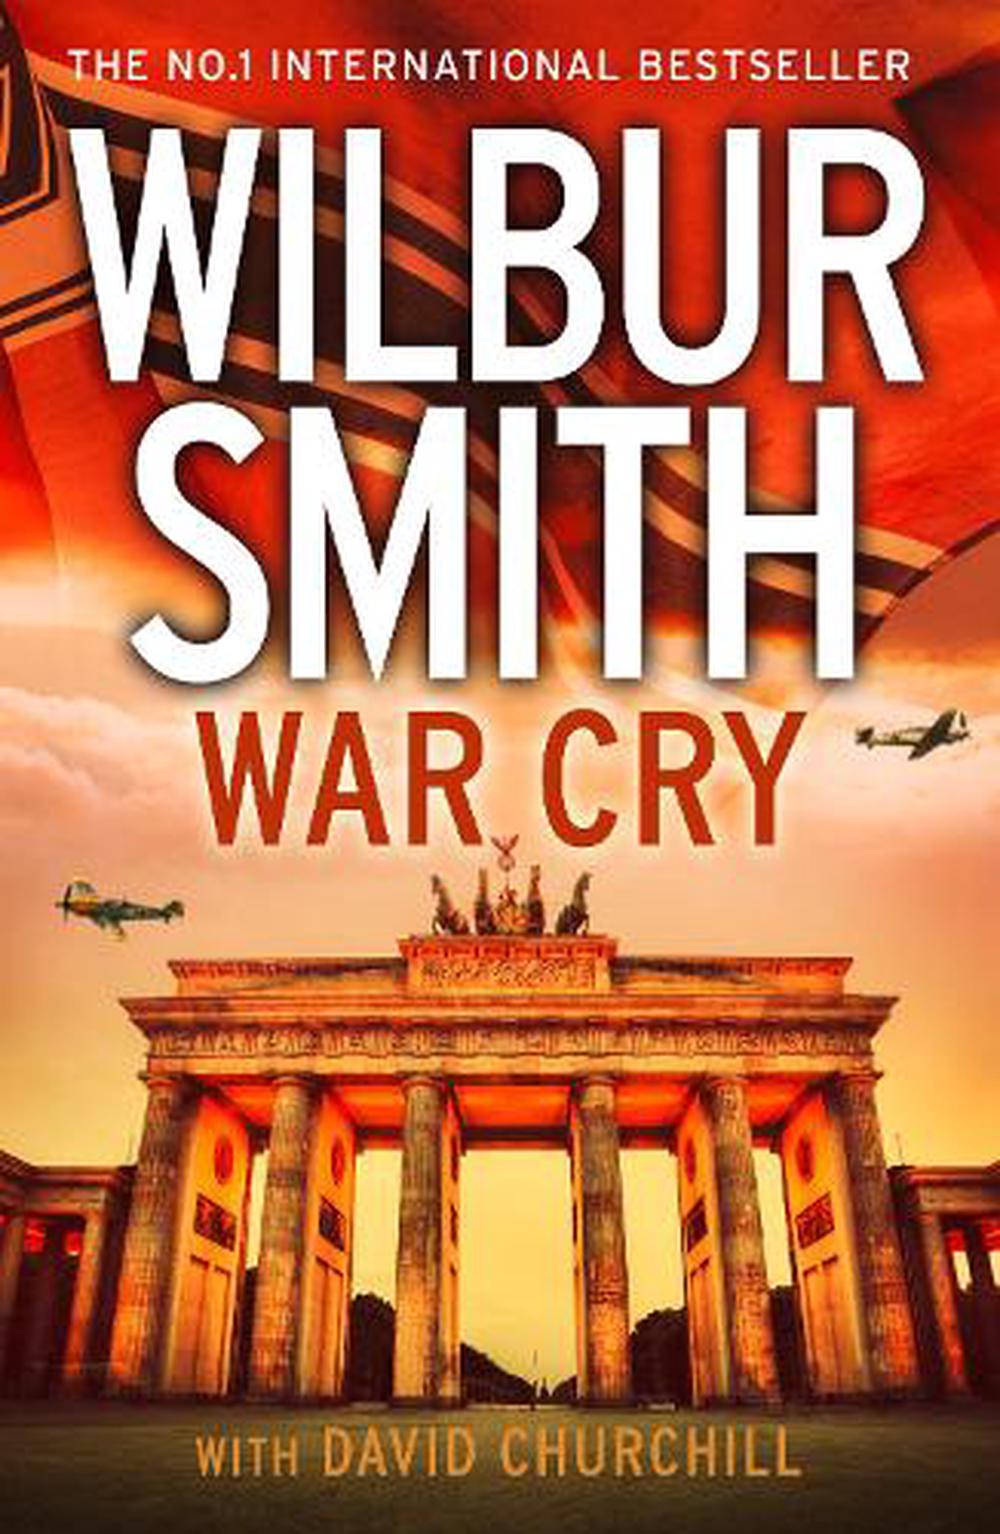 War Cry by Wilbur Smith Paperback Book Free Shipping! 9780007535897 eBay